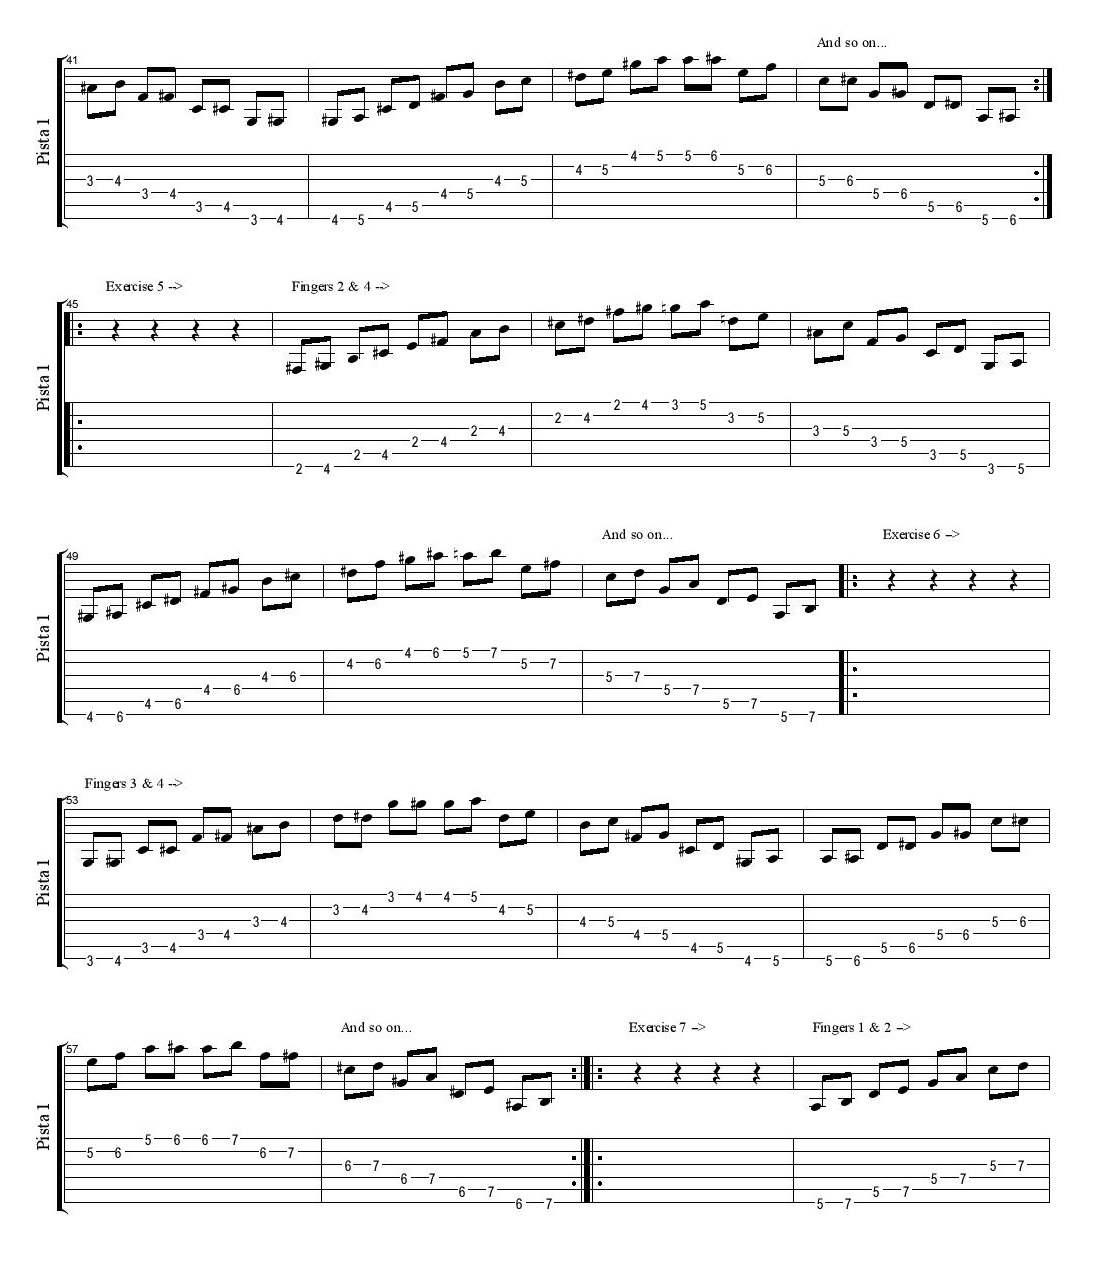 Guitar Pro   Warm Up Exercises   Warm Up Exercises By Bright_Eyes v1 page 003 apprendre la guitare